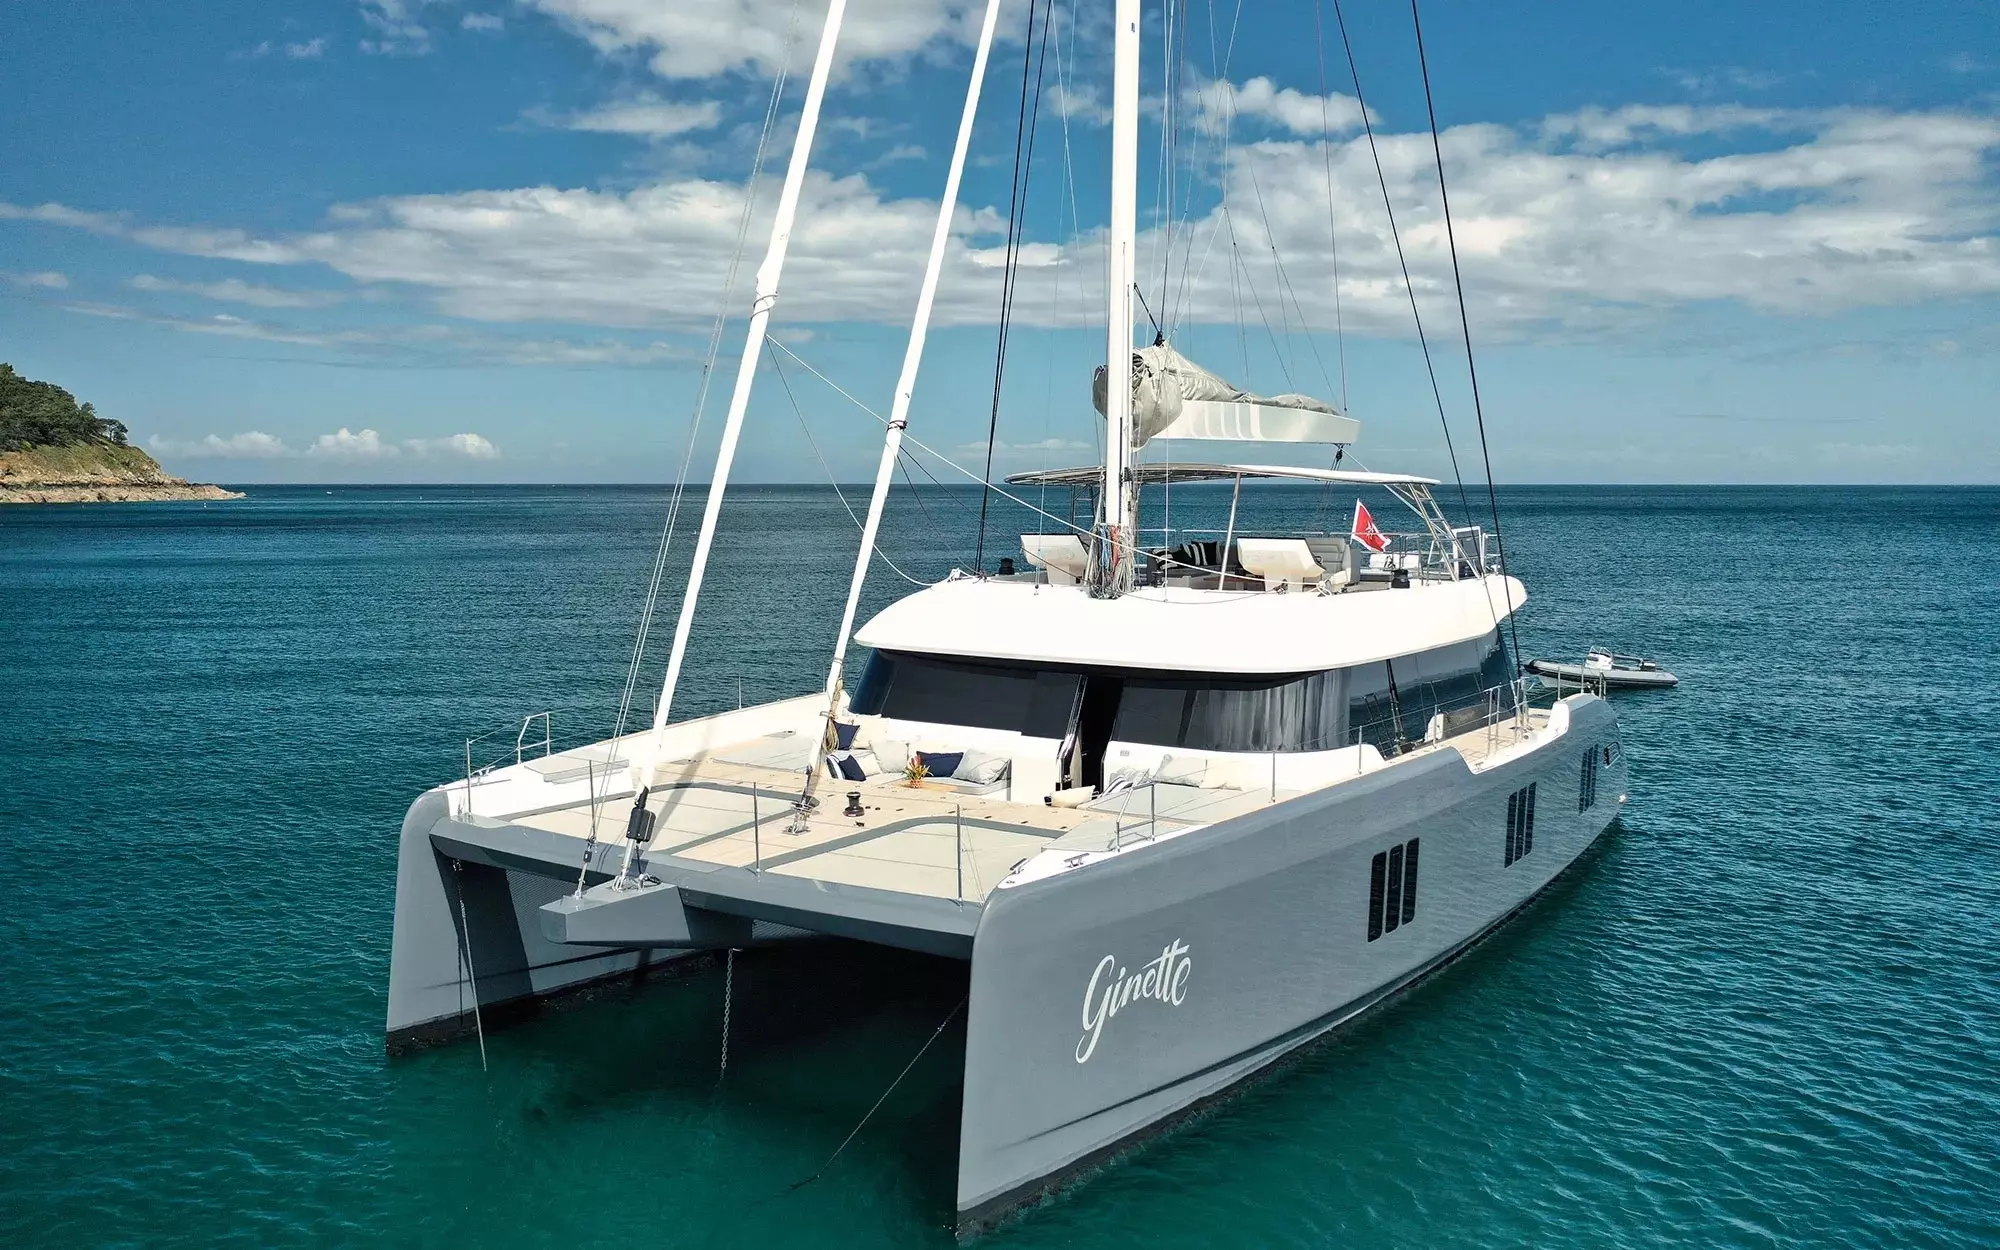 Ginette by Sunreef Yachts - Special Offer for a private Luxury Catamaran Charter in Tasmania with a crew